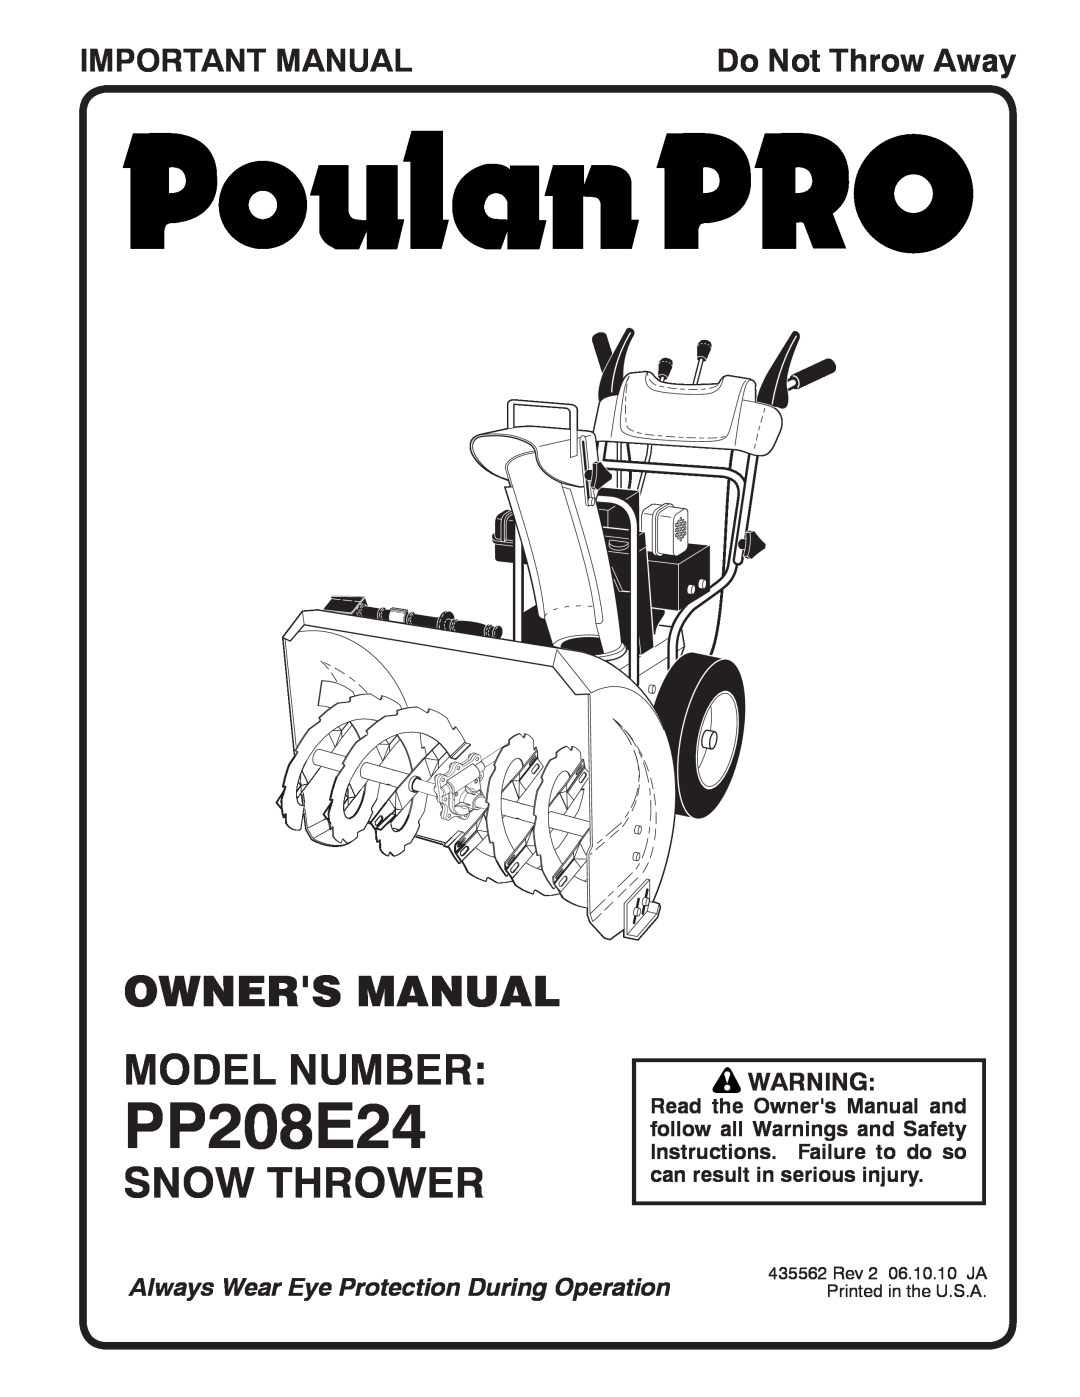 Poulan 96198002603, 435562 owner manual Snow Thrower, Important Manual, PP208E24, Do Not Throw Away 